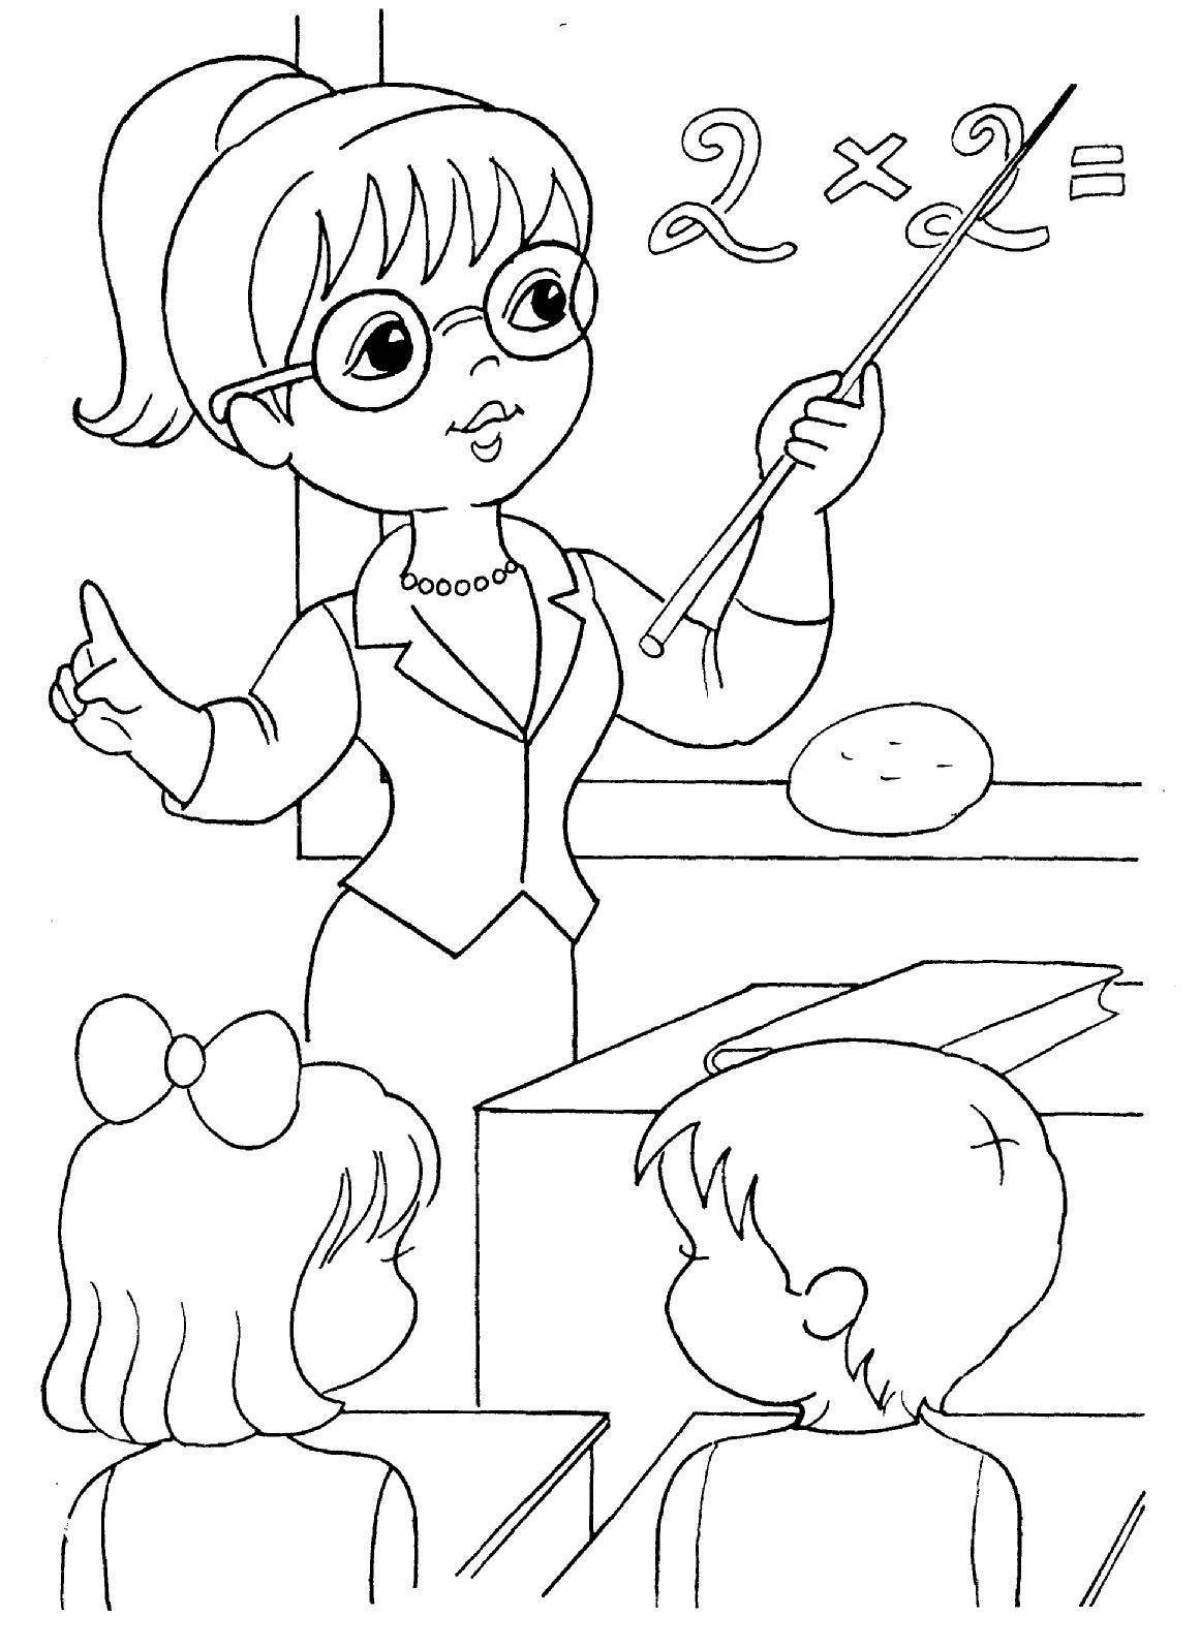 Educational profession coloring book for kids